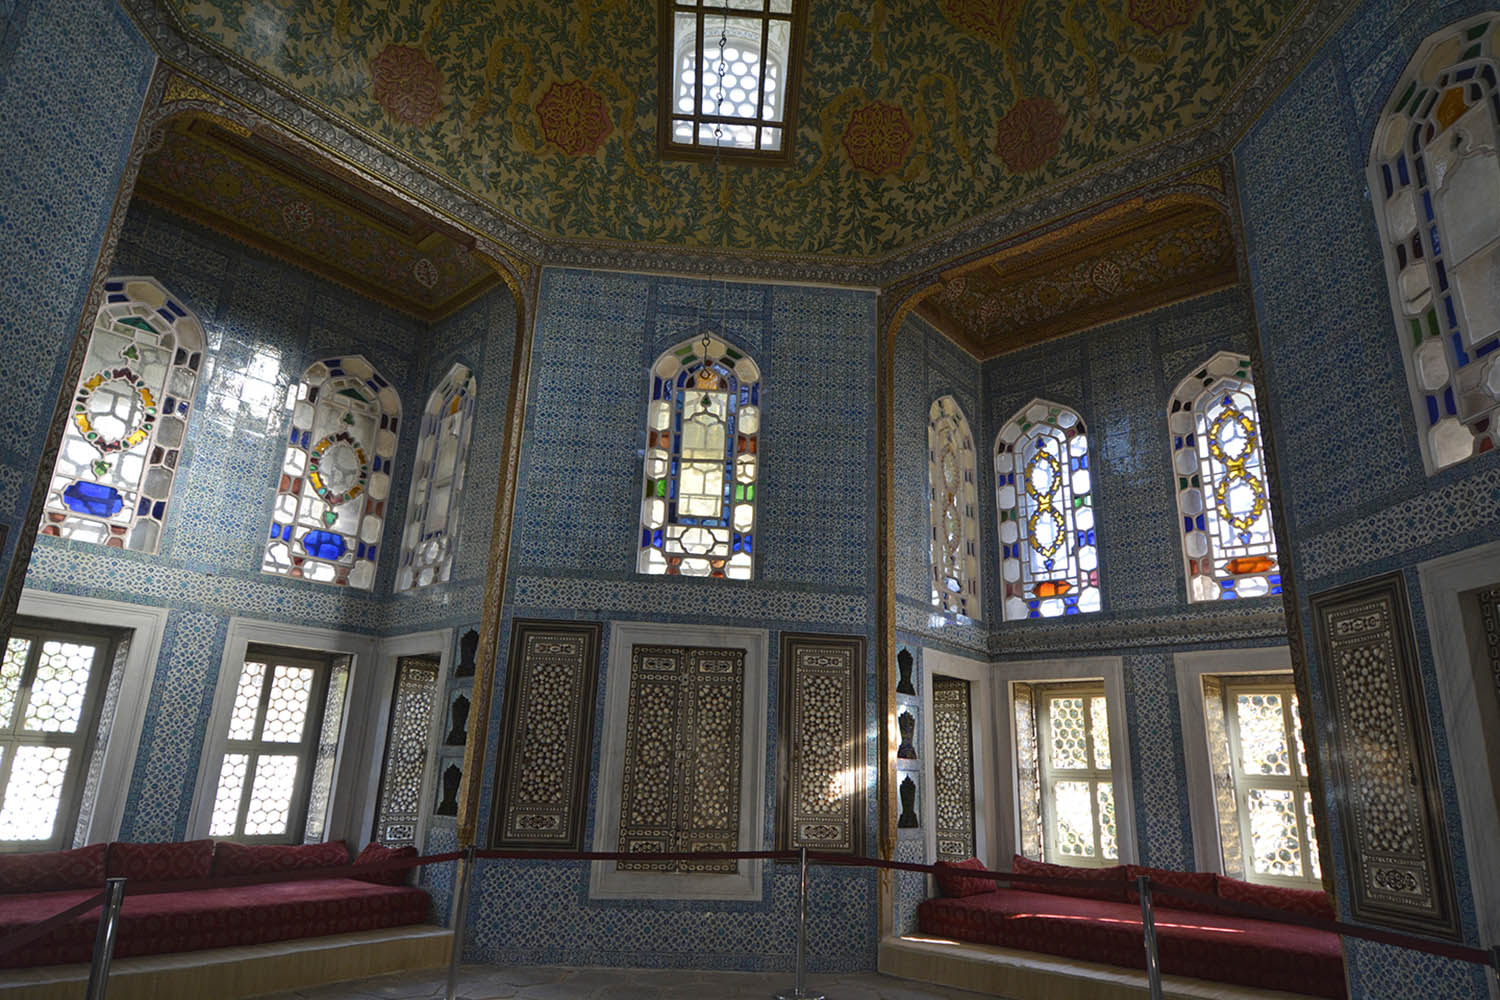 Interior view of the Revan Köşkü, capturing the elaborate interior ornamentation, including Iznik tiles, inlaid cabinets and floral painted dome.